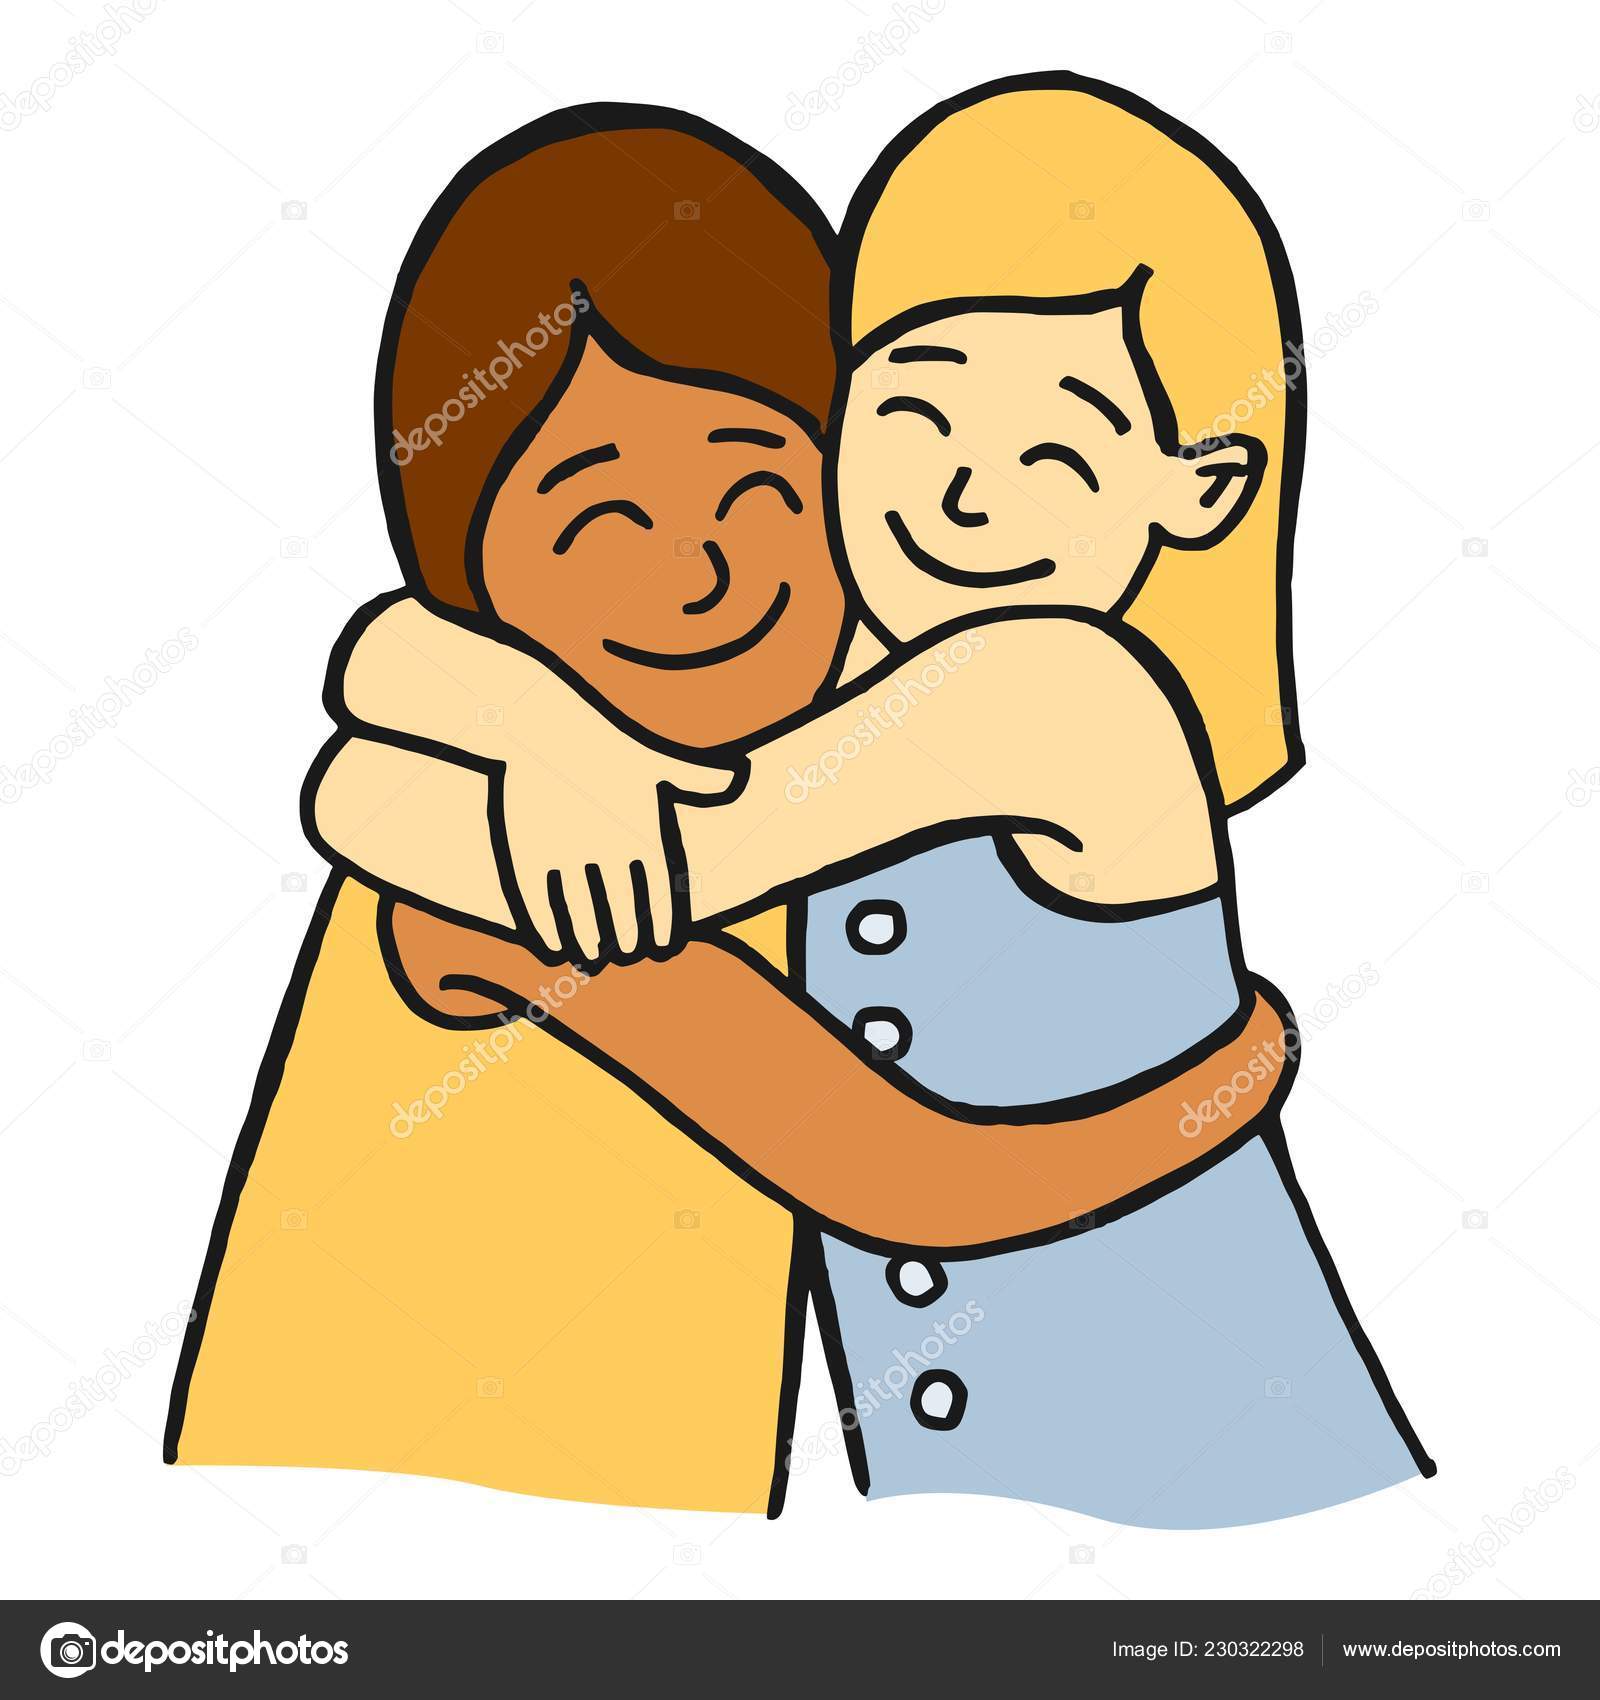 Cartoon Style Vector Illustration Two Young Girls Friends Hugging Smiling -...